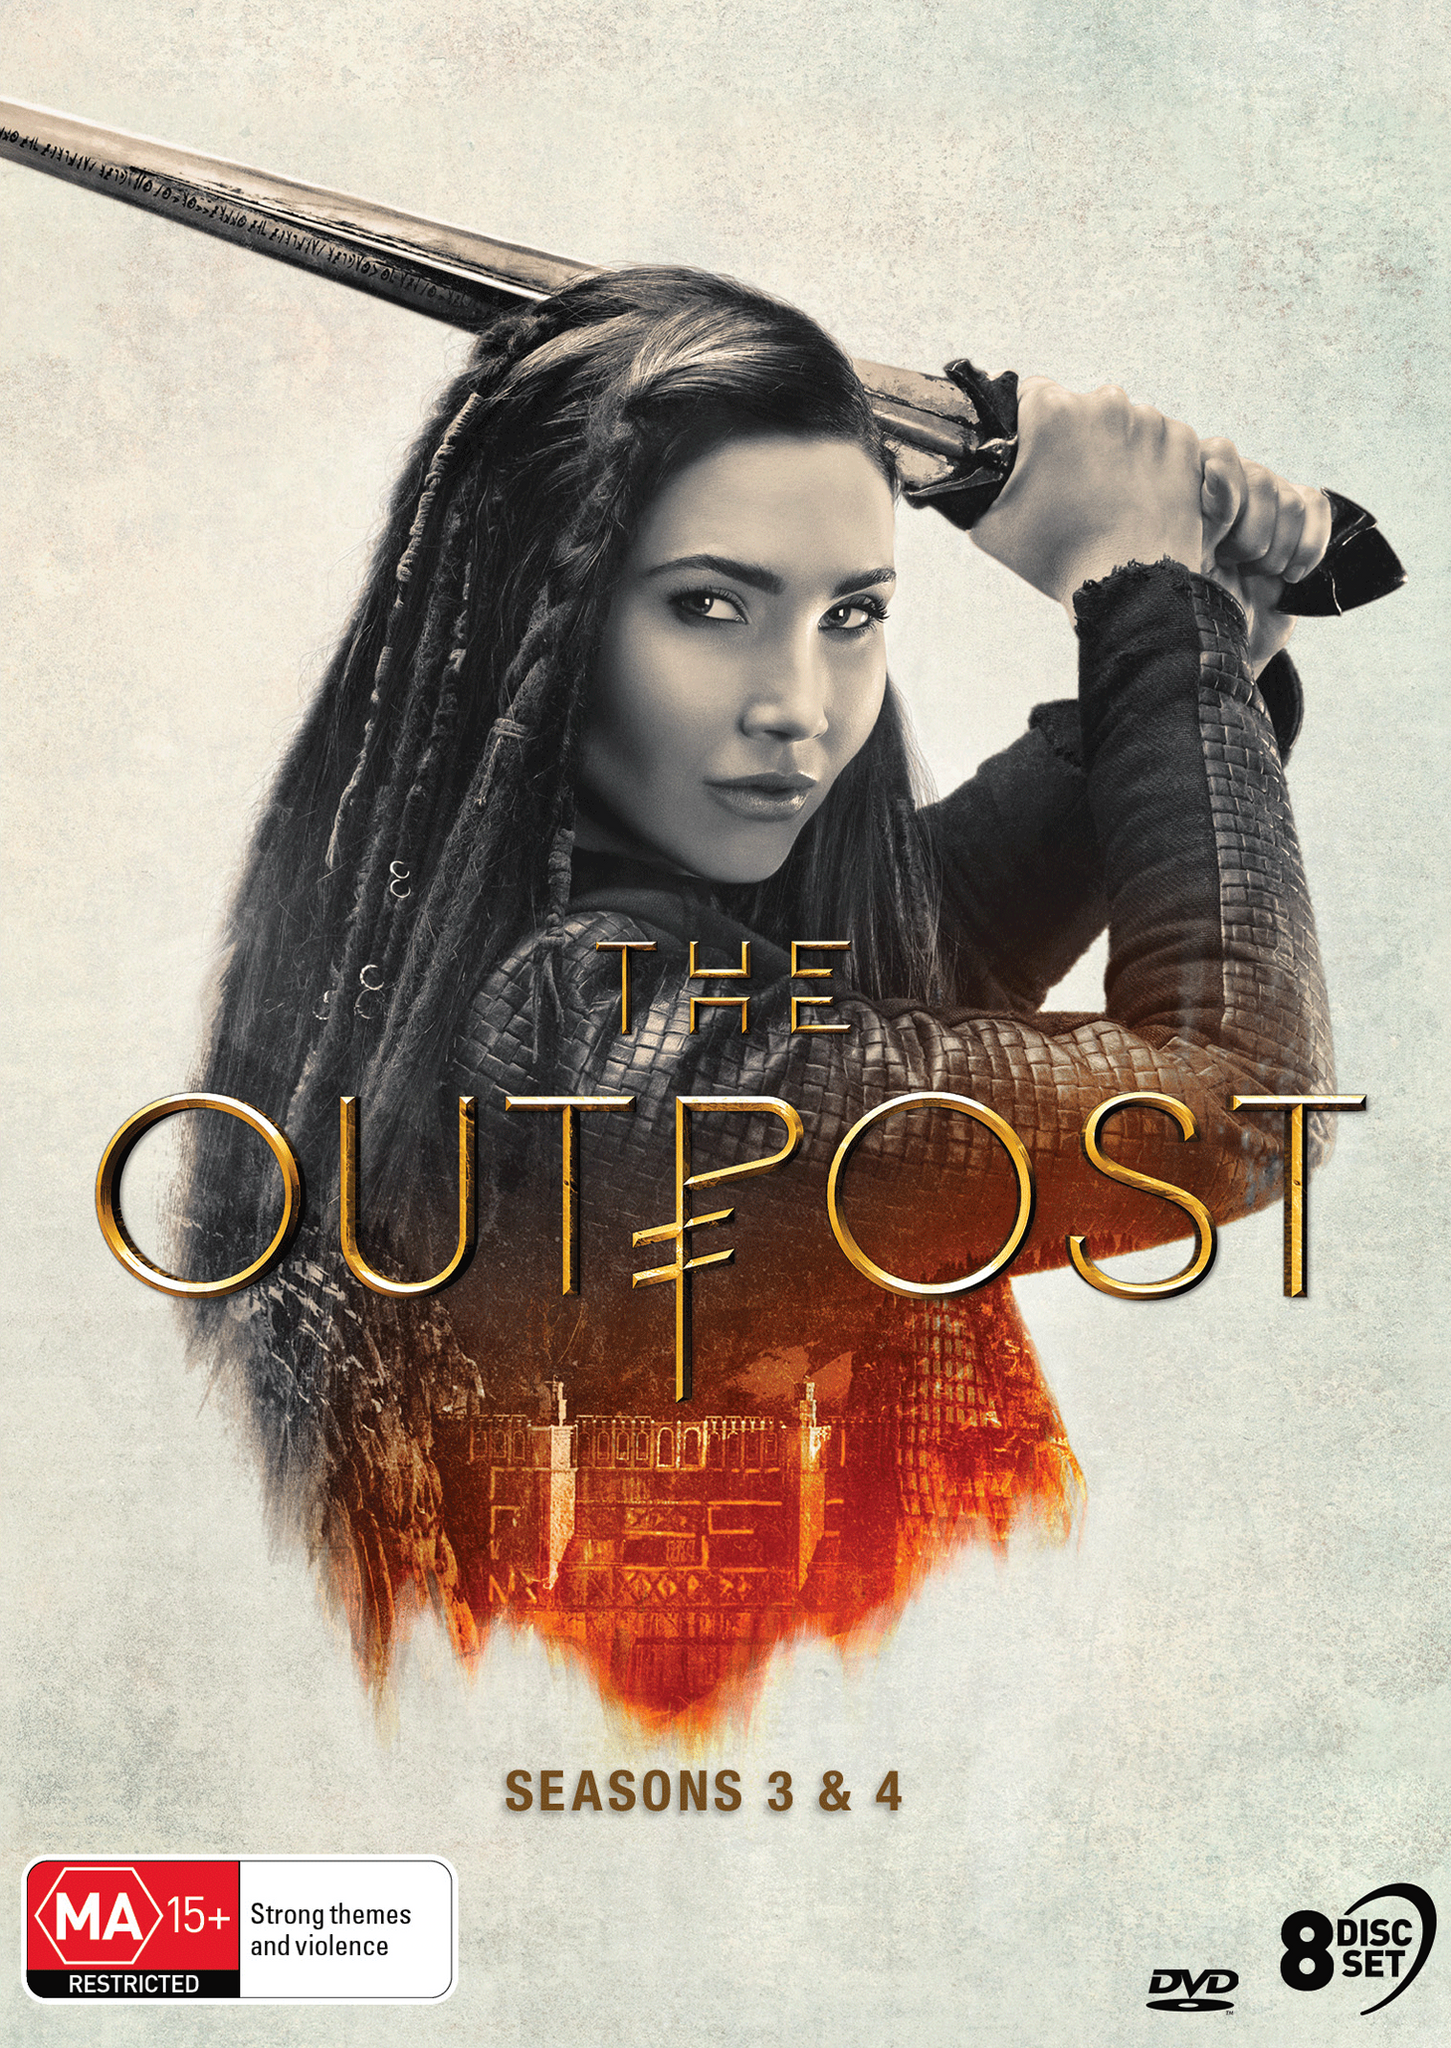 THE OUTPOST: SEASONS 3 & 4 - DVD